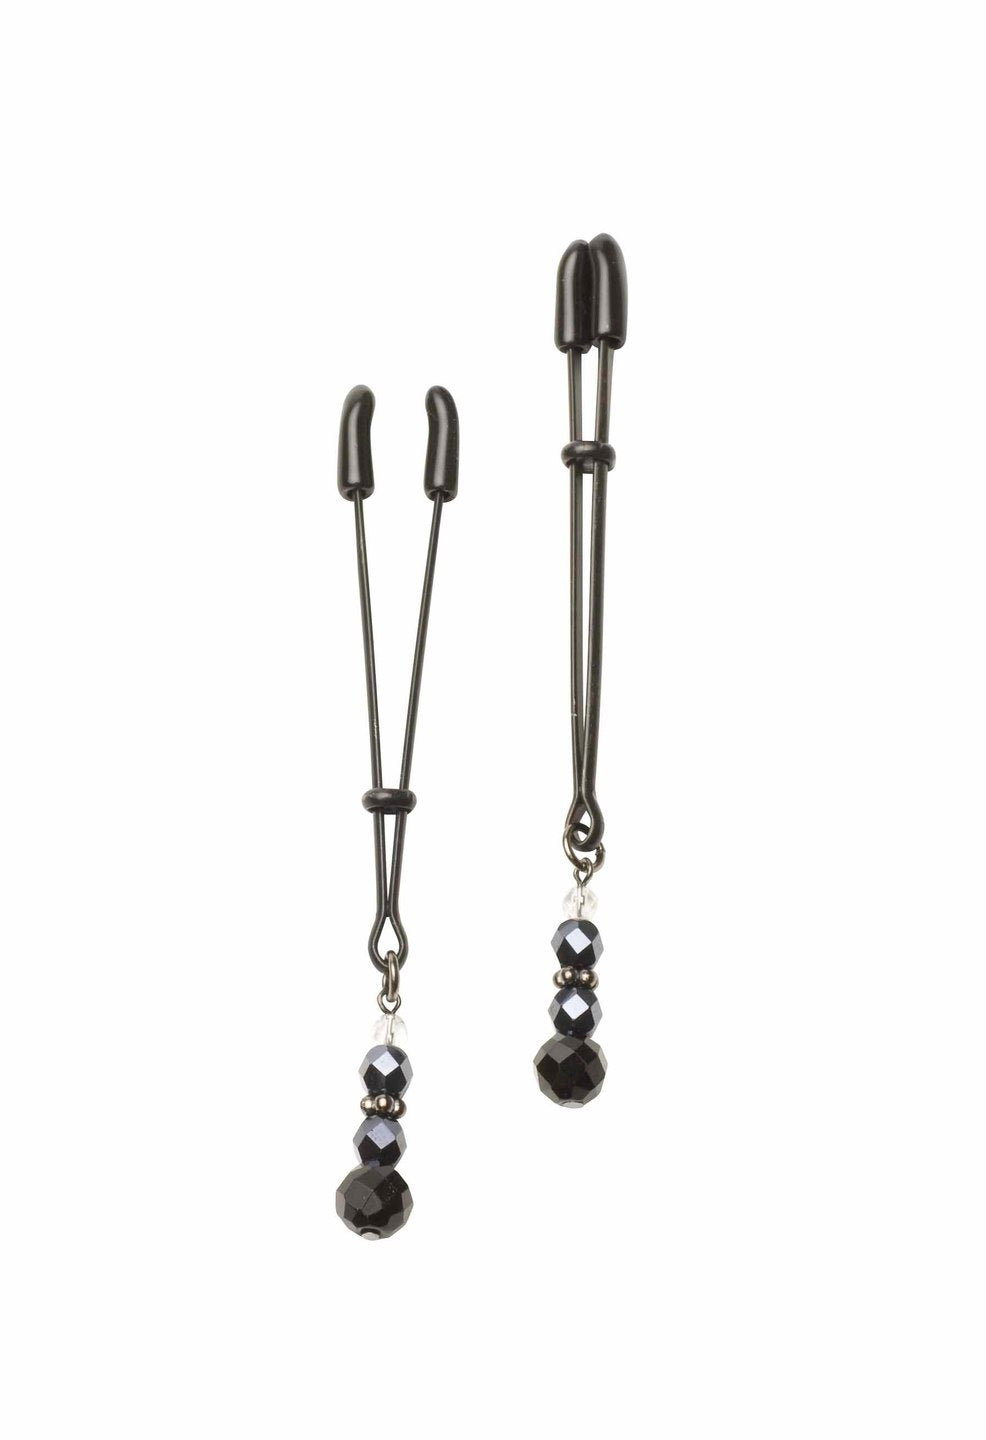 The Tweezer Clamps with black beads.